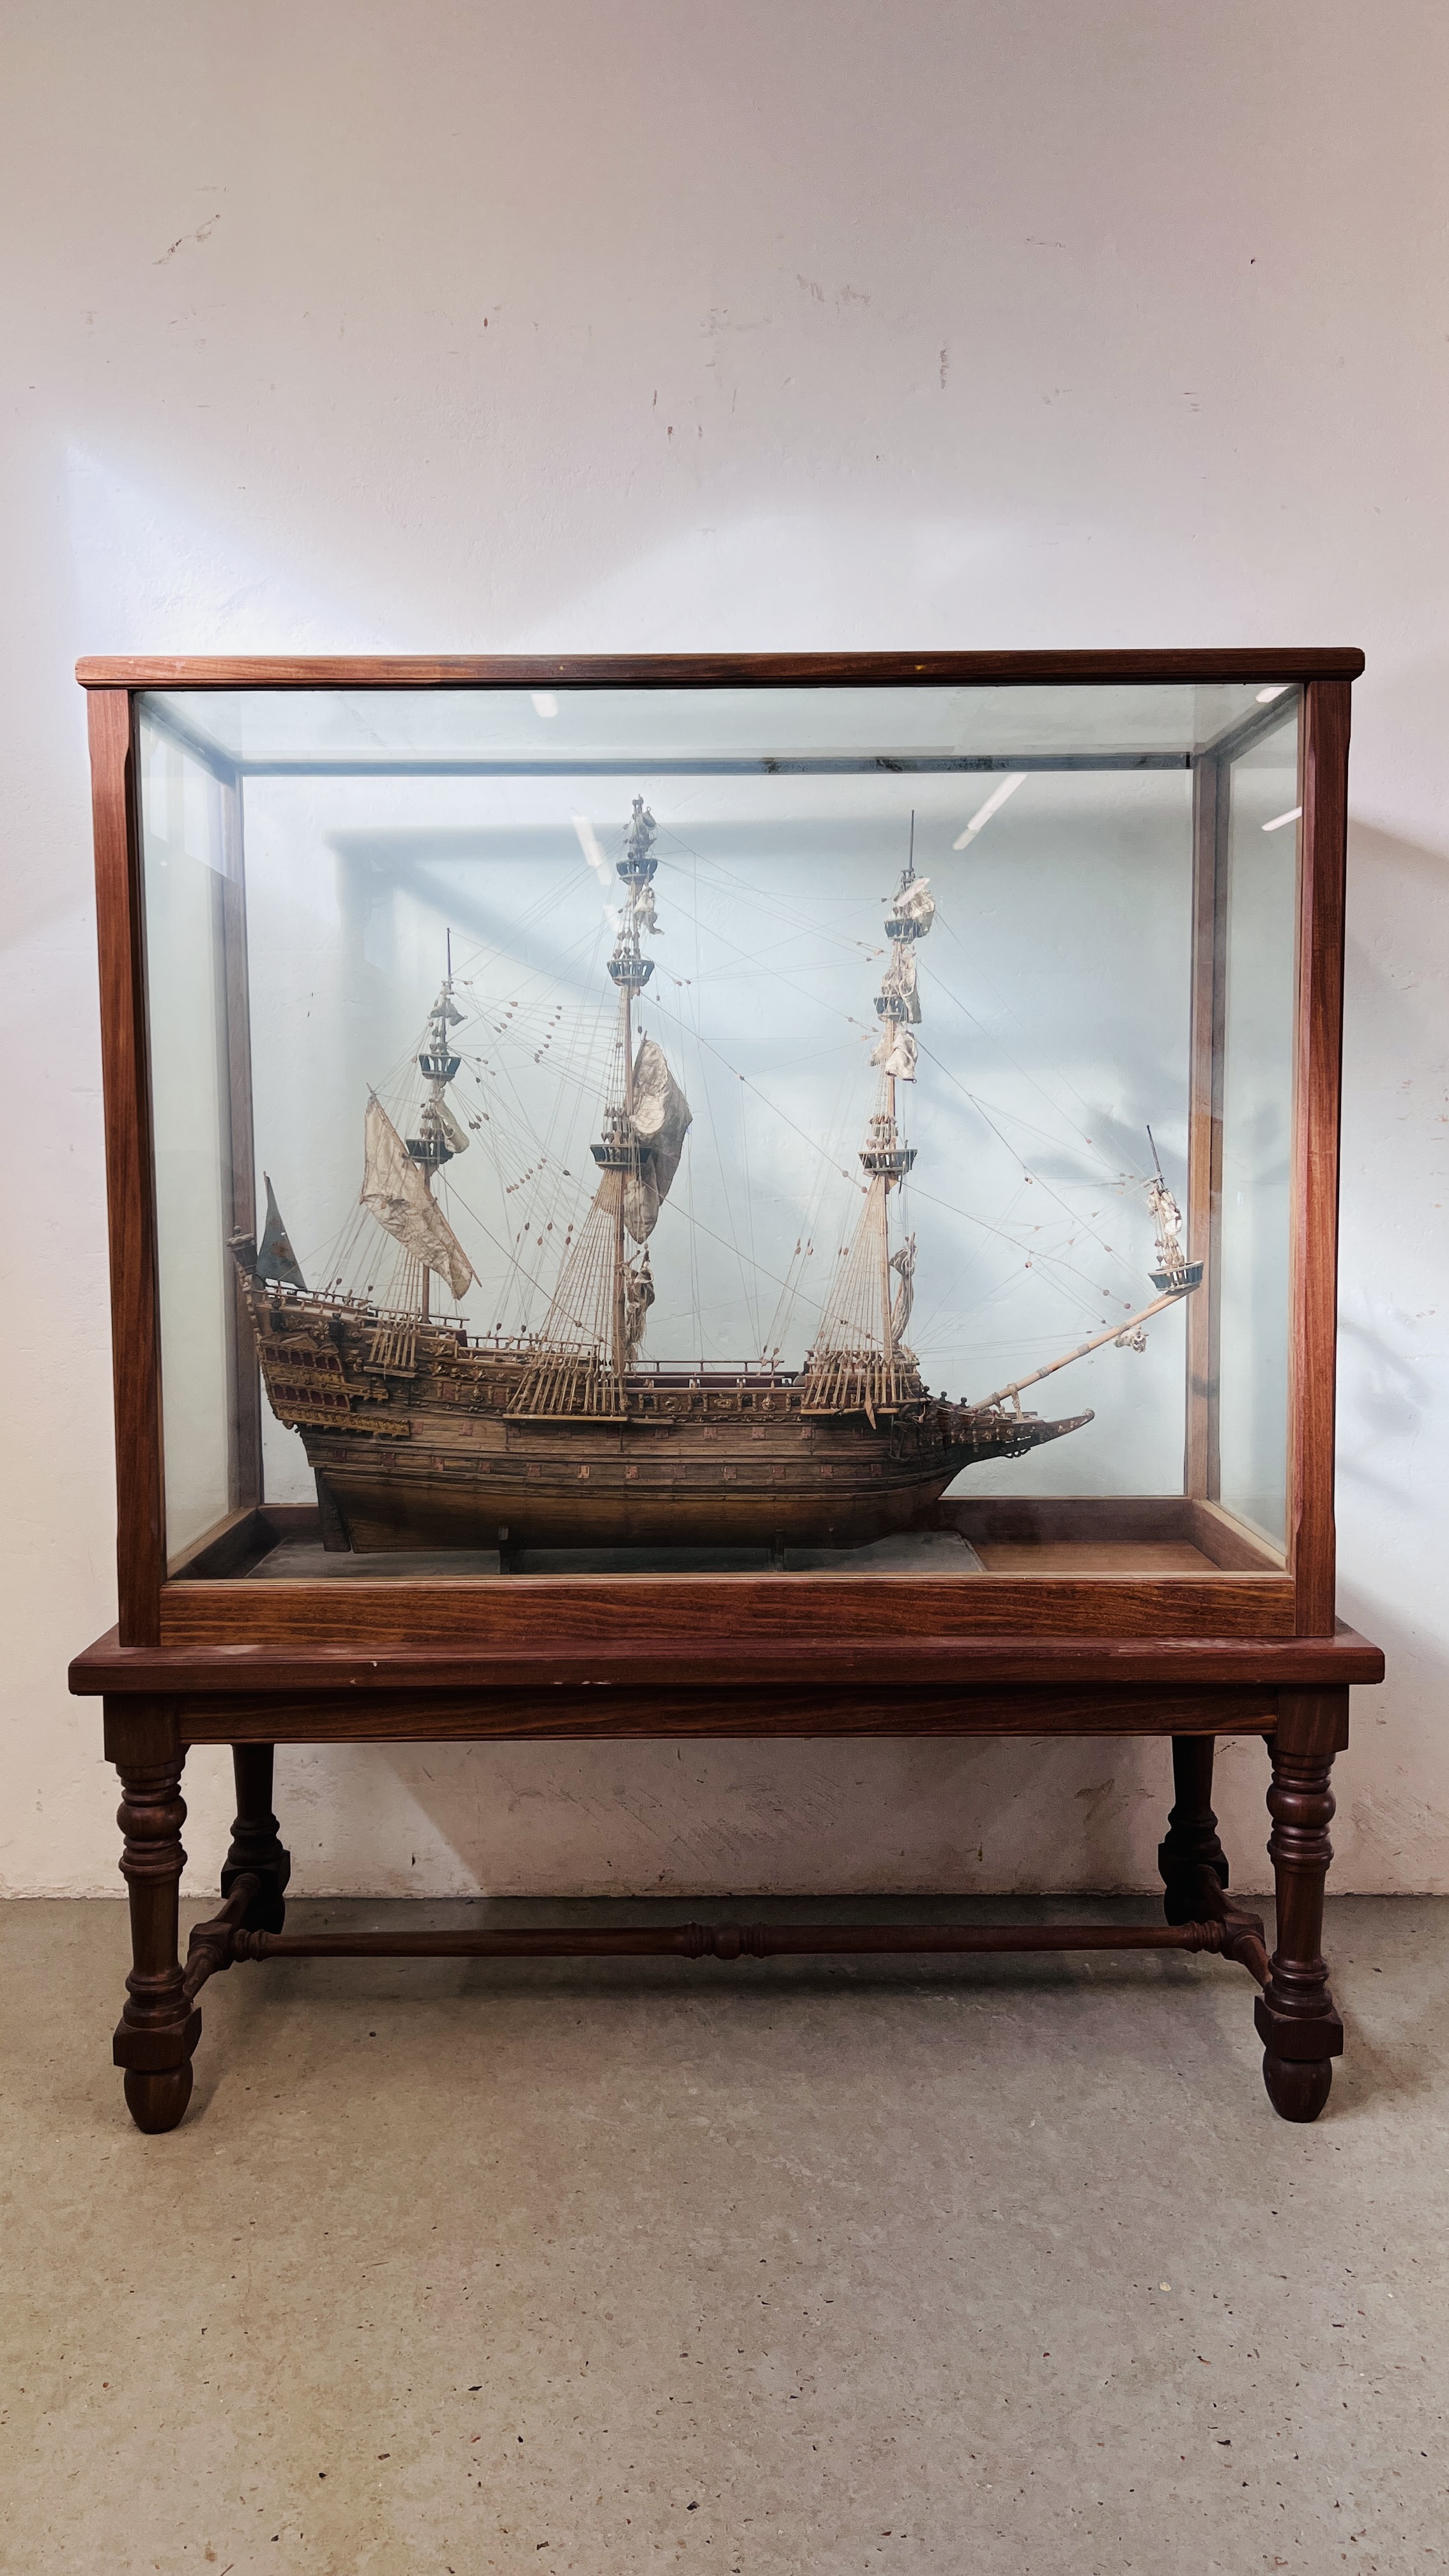 LARGE MODEL GALLEON "SOVEREIGN OF THE SEA" IN MAHOGANY DISPLAY CASE - W 128CM. D 55CM. H 146CM.